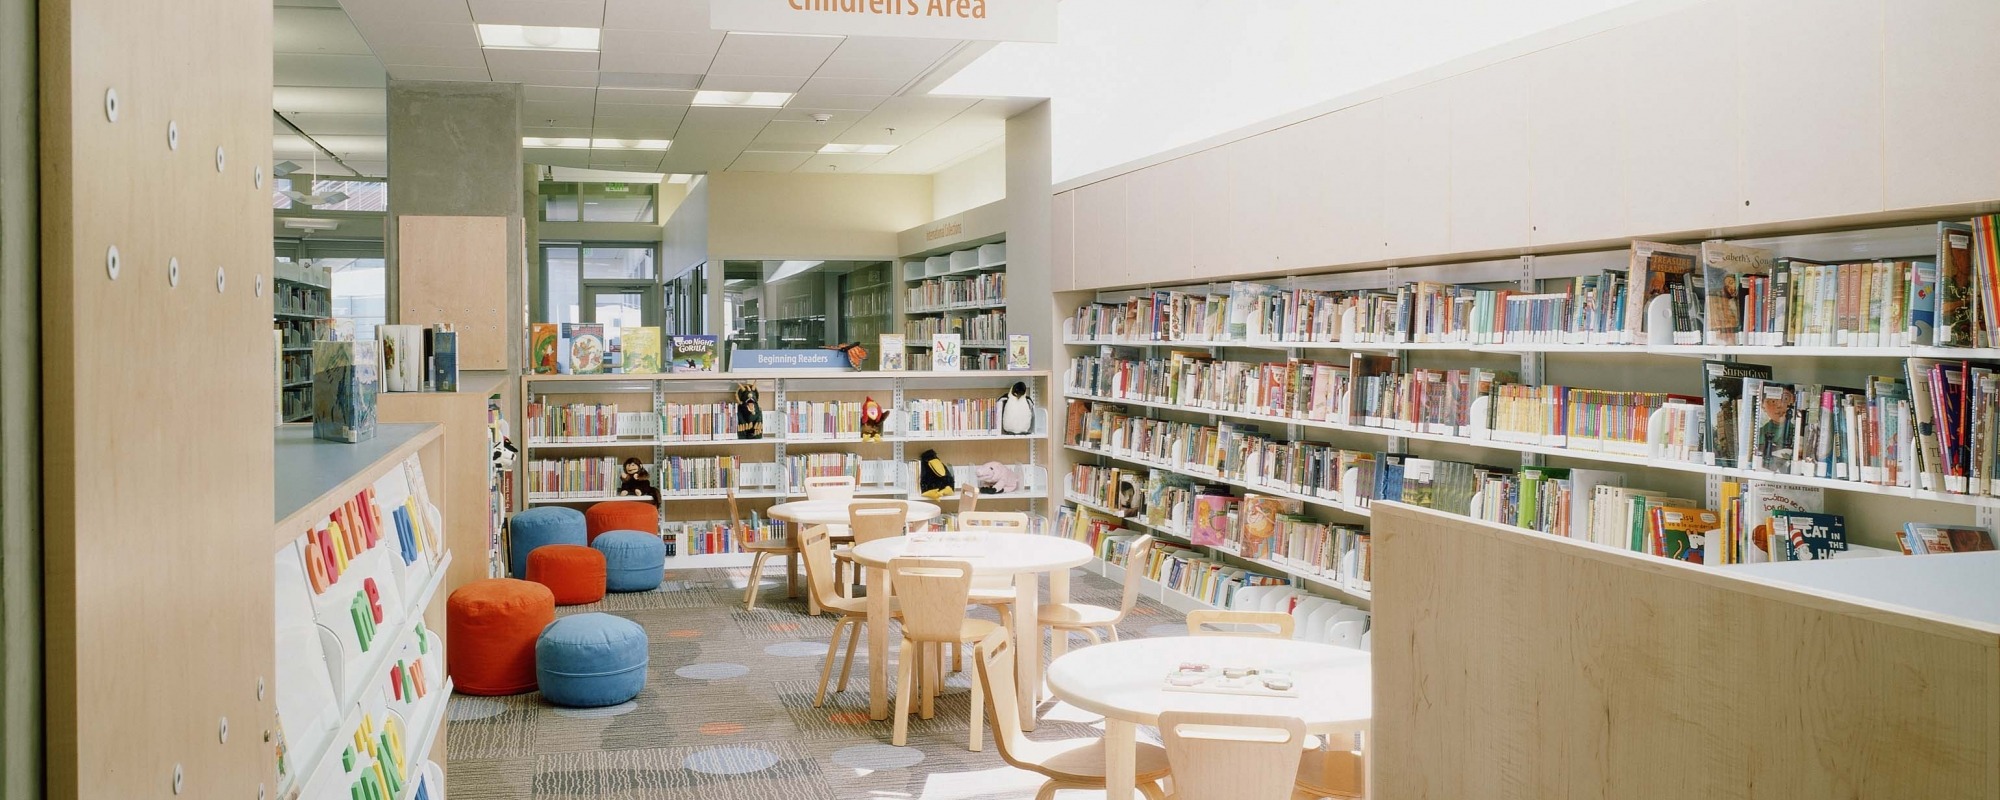 Mission Bay Branch Library